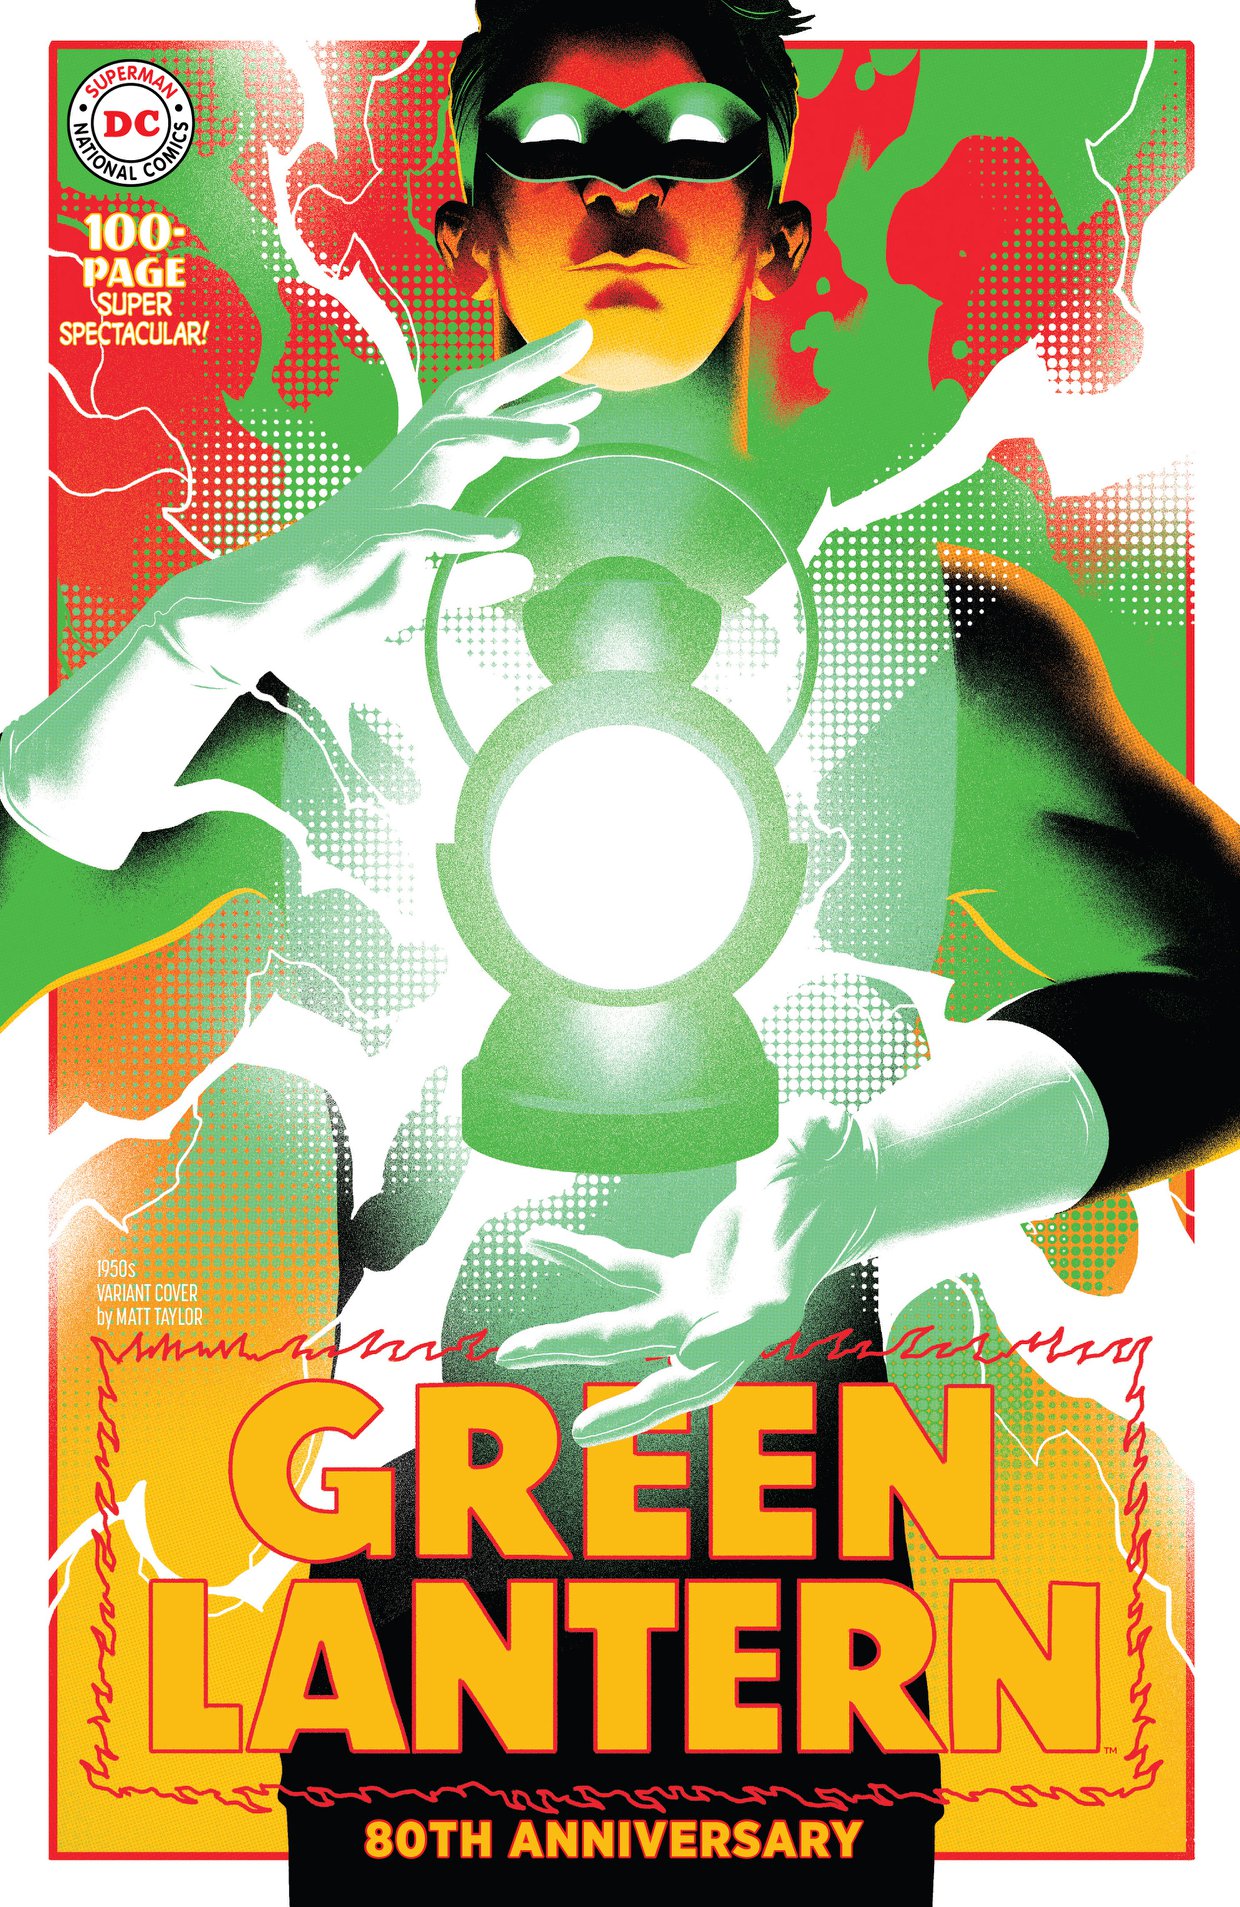 Green Lantern 80th Anniversary 100 Page Super Spectacular #1 1950s Variant Edition